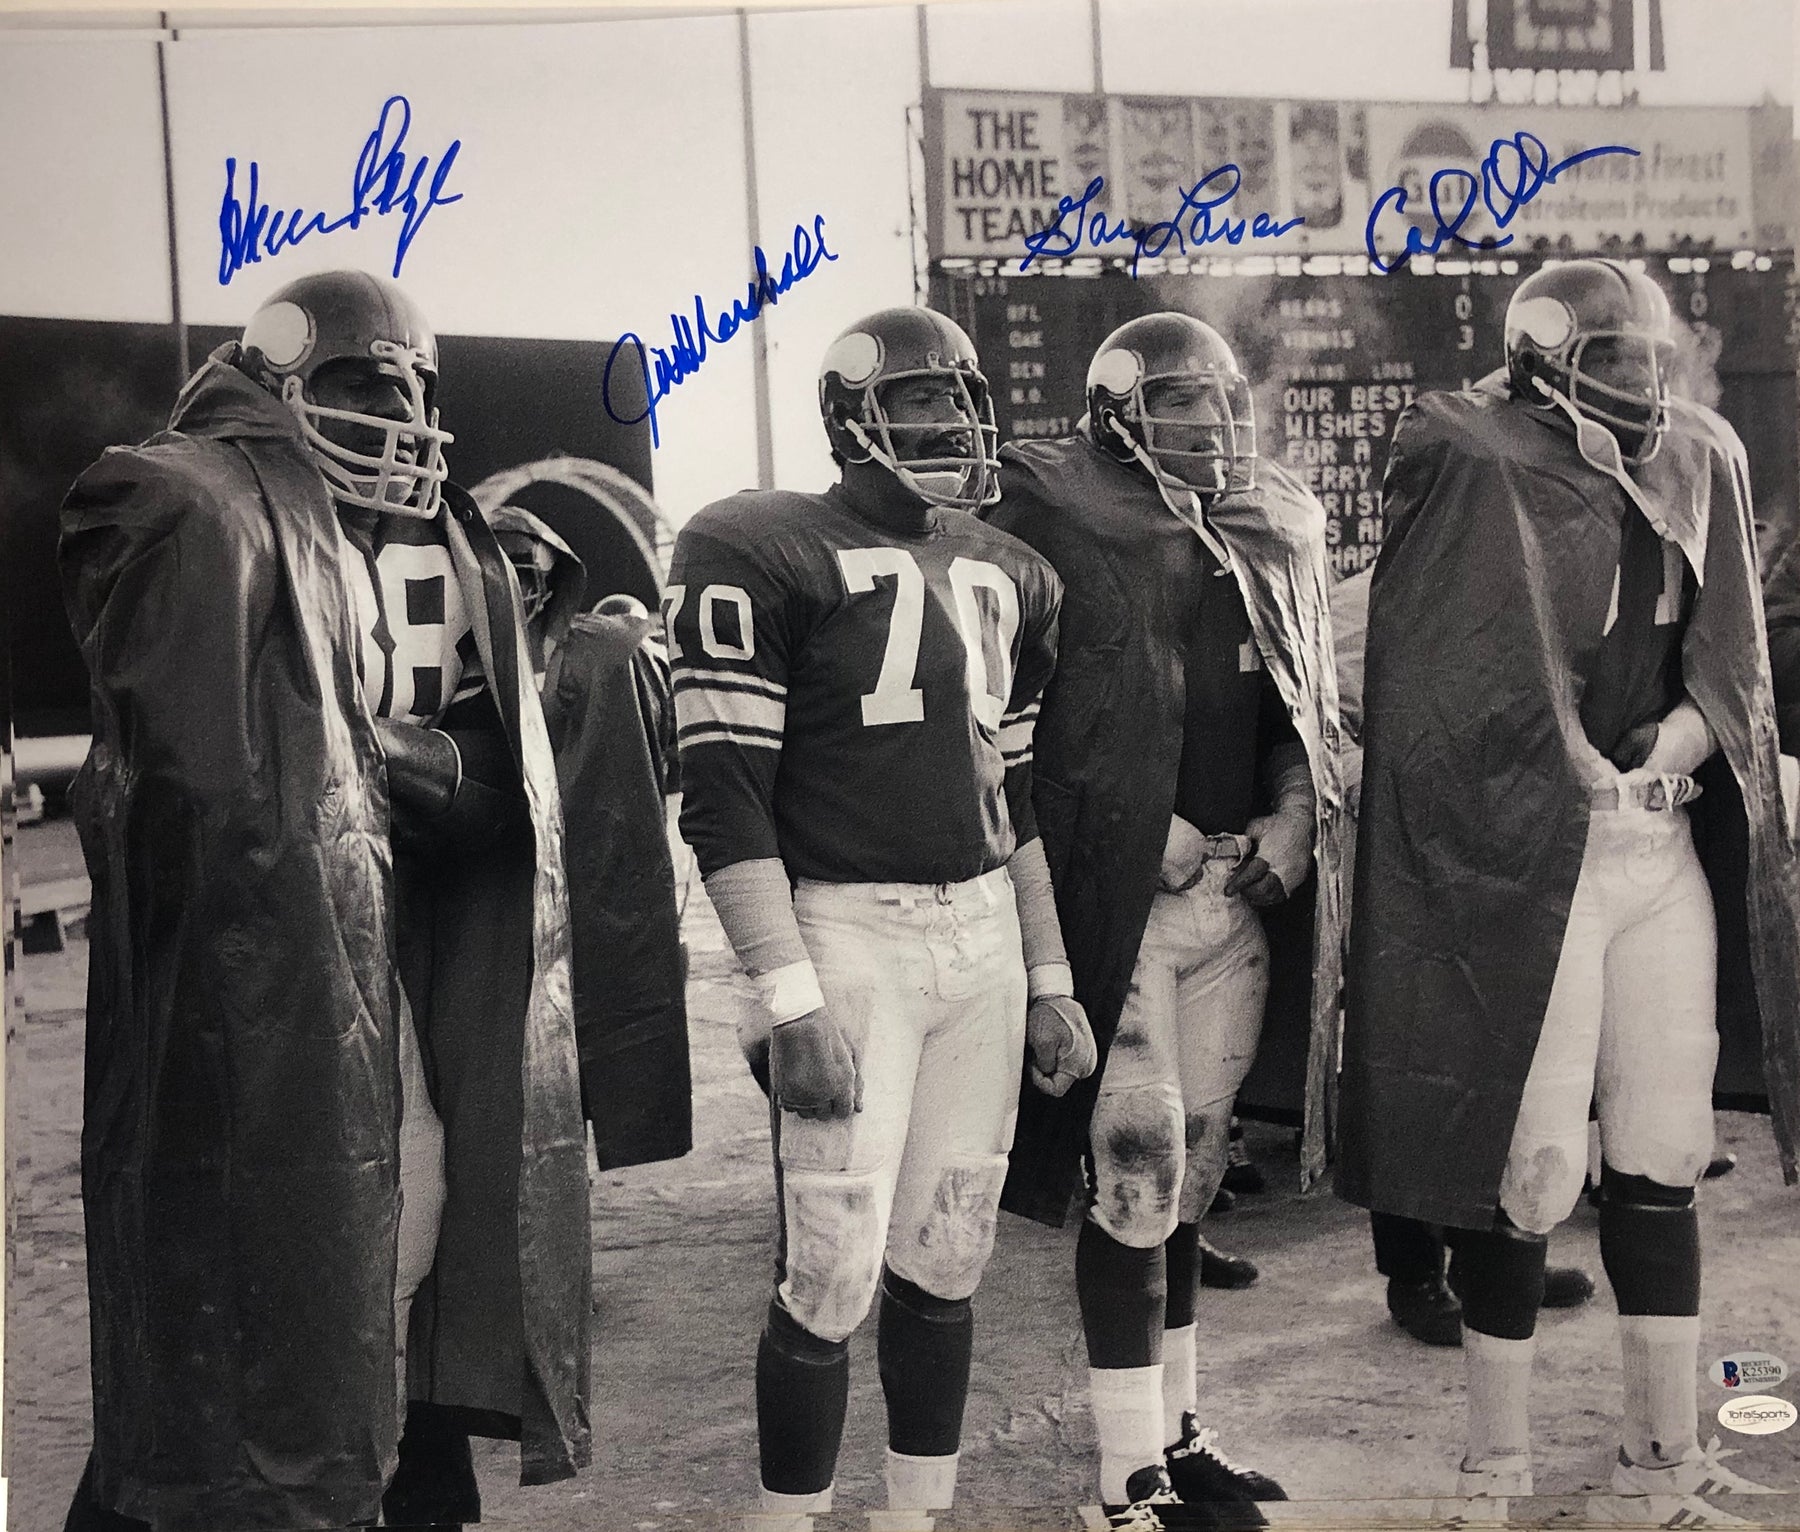 Purple People Eaters Signed Black and White 20 x 24 Photo - Signed by Page, Eller, Marshall, and Larsen